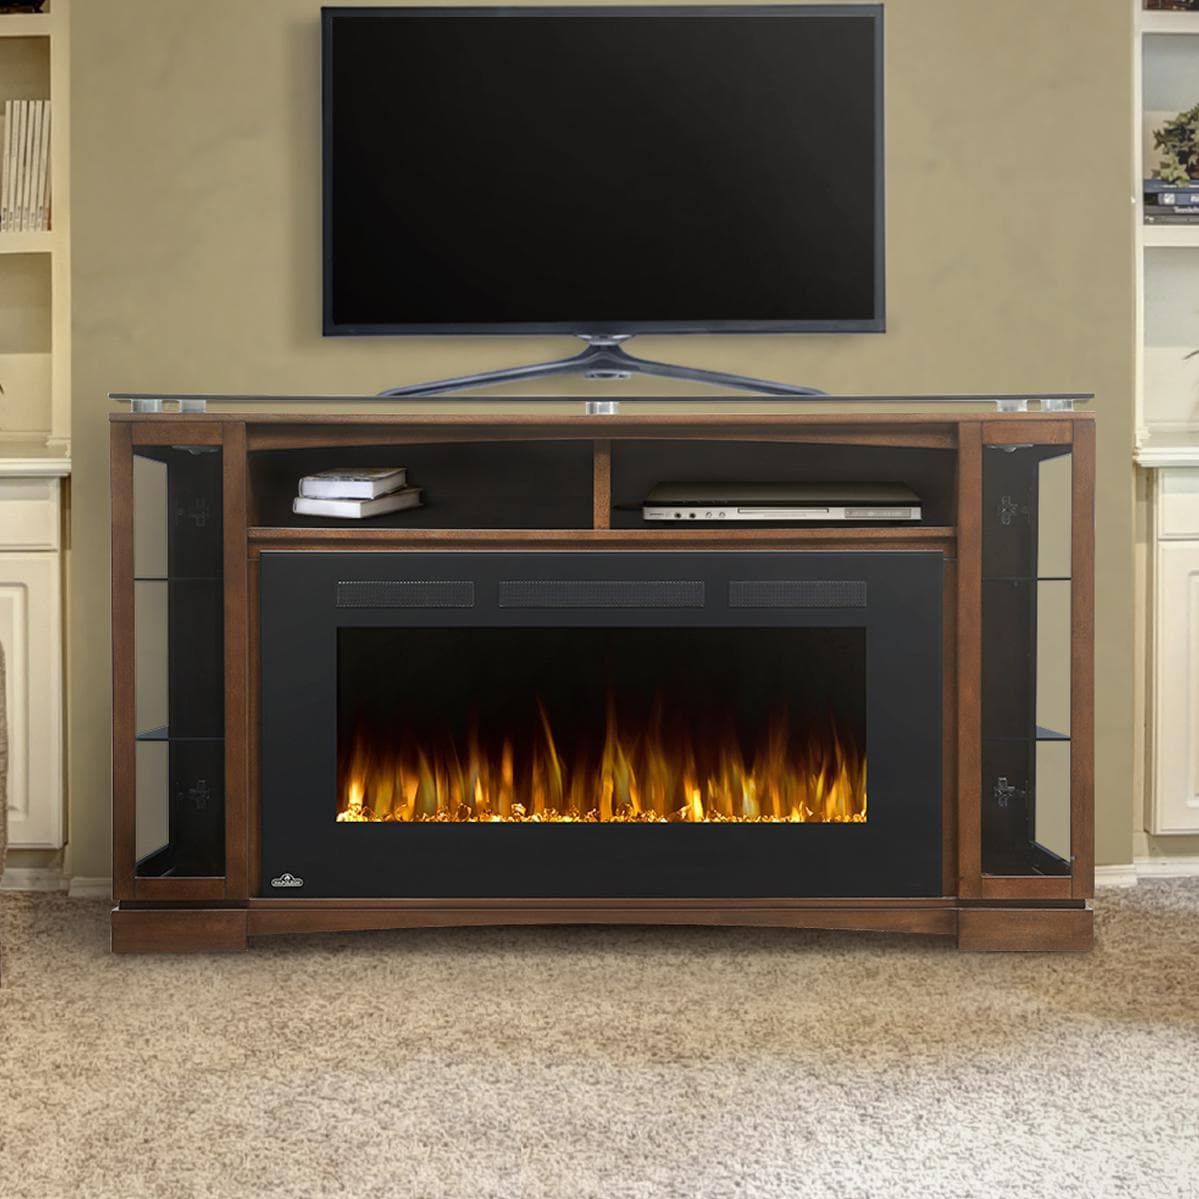 Best Electric Fireplace Entertainment Centers For 2020 : Bbqguys Pertaining To Electric Fireplace Entertainment Centers (View 5 of 20)